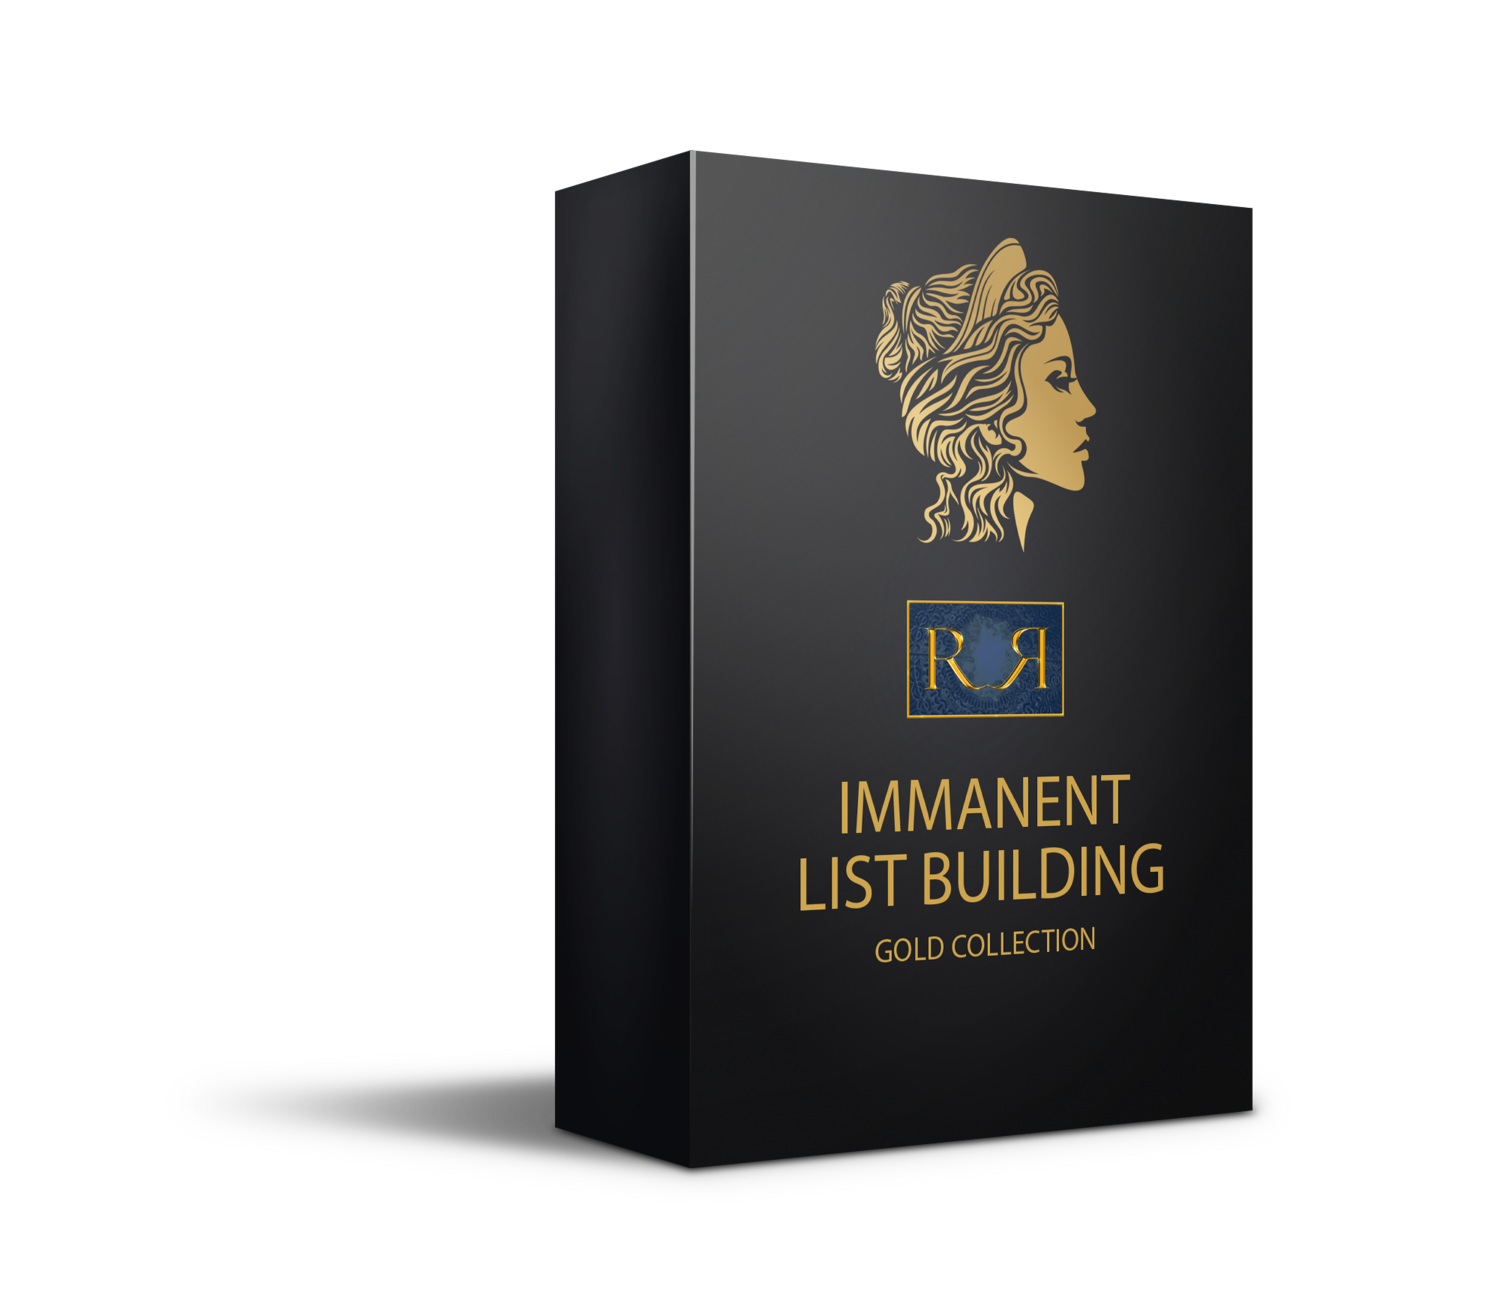 Immanent List Building - Refined Reflections